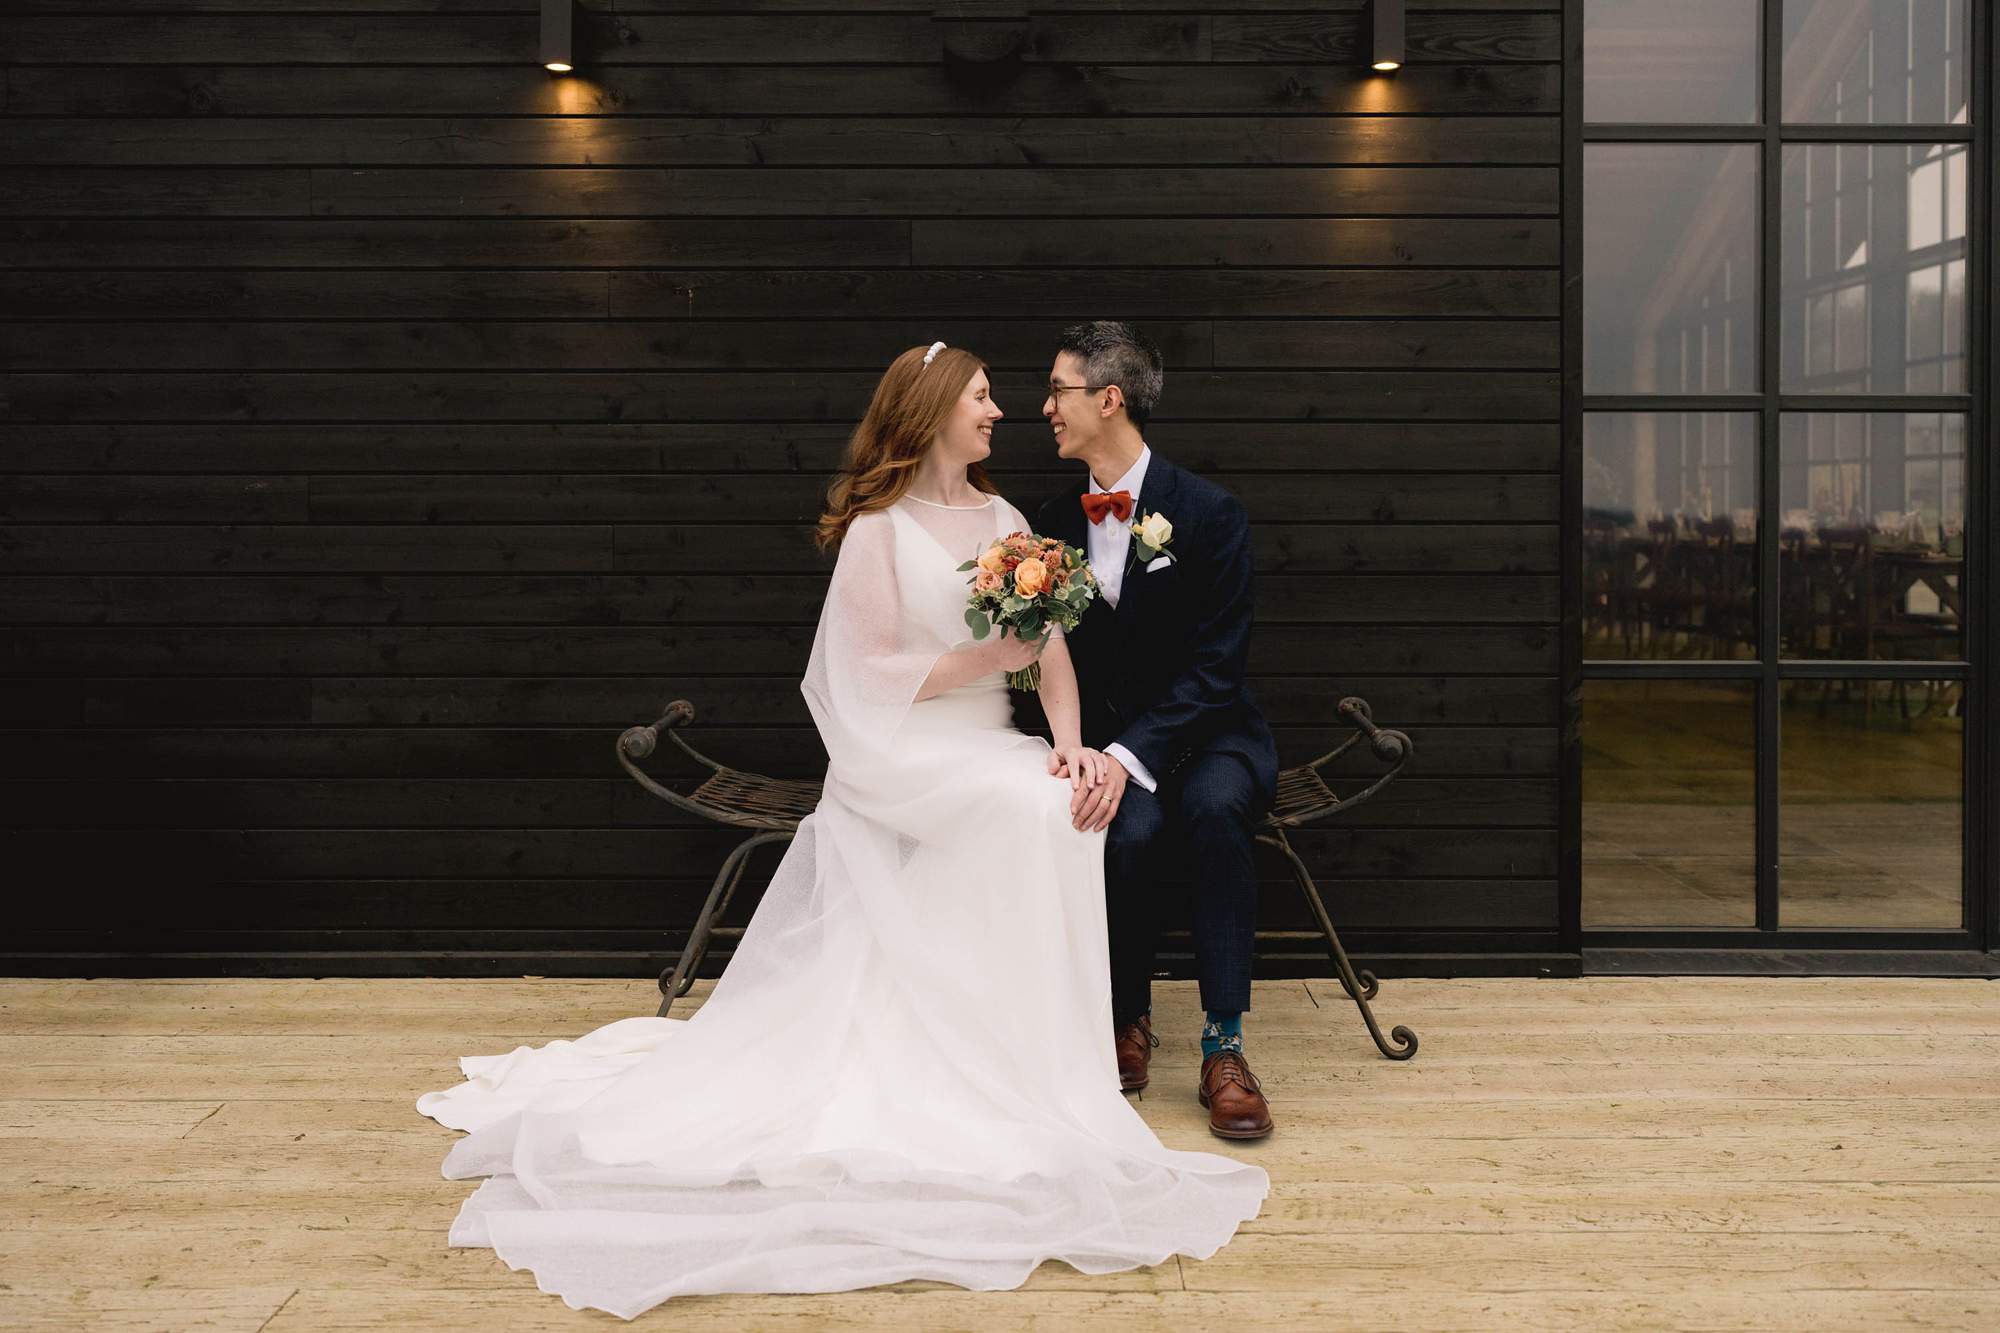 Bride and groom share a moment on a bench at the Barn at Botley Hill wedding venue.